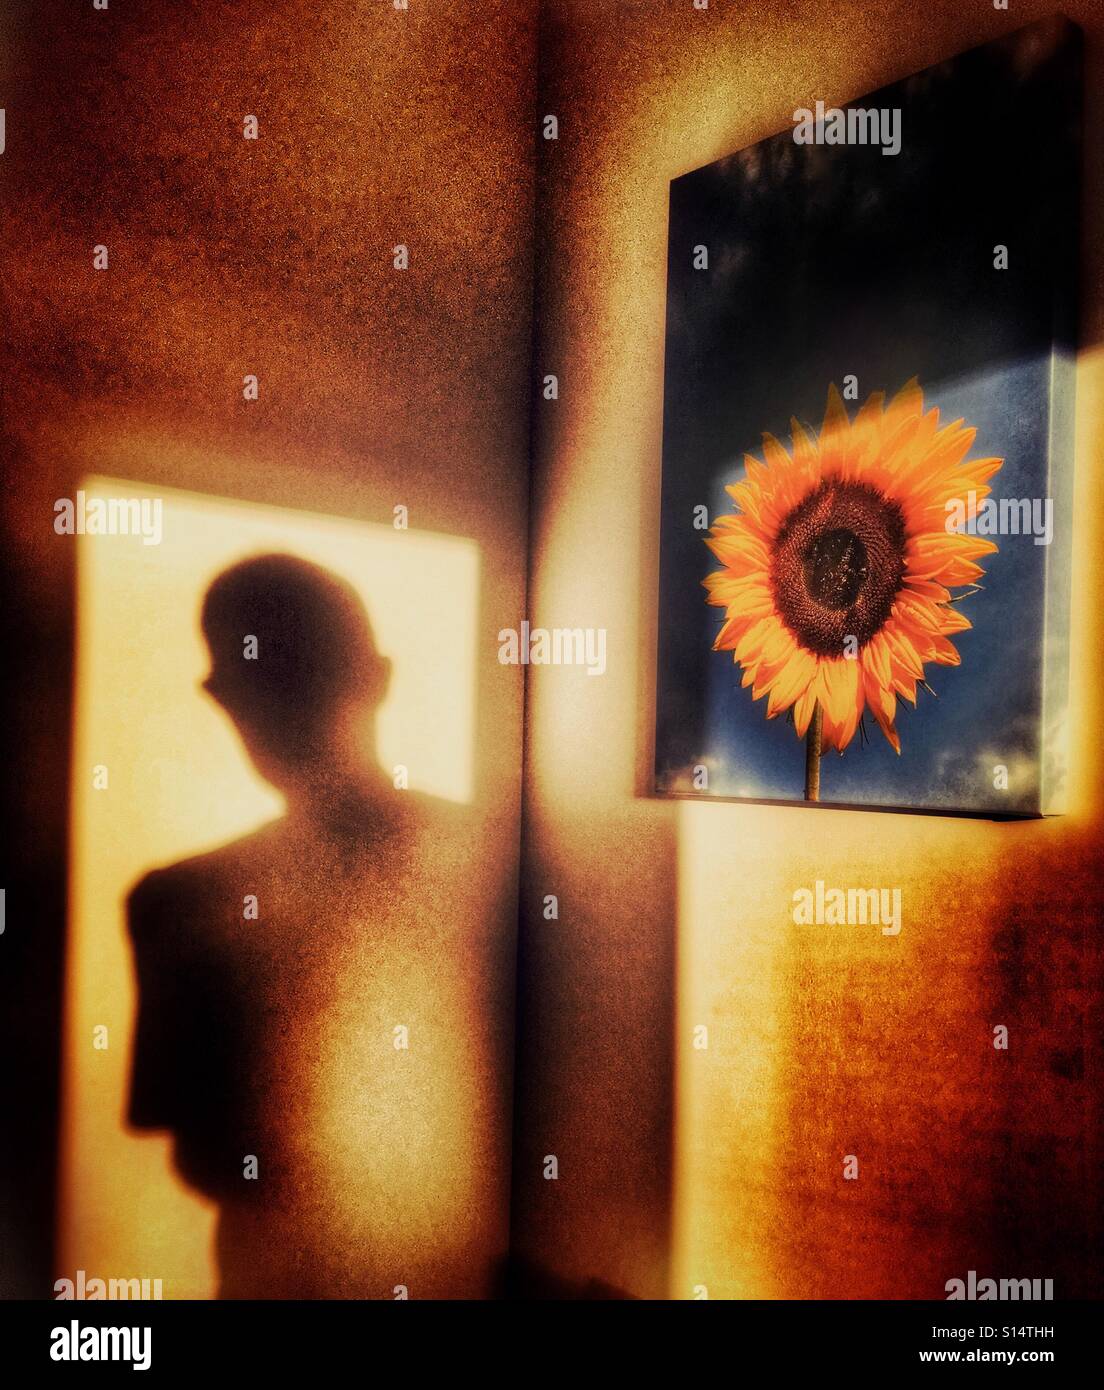 Shadow of figure in door of hall with sunflower picture on the wall Stock Photo